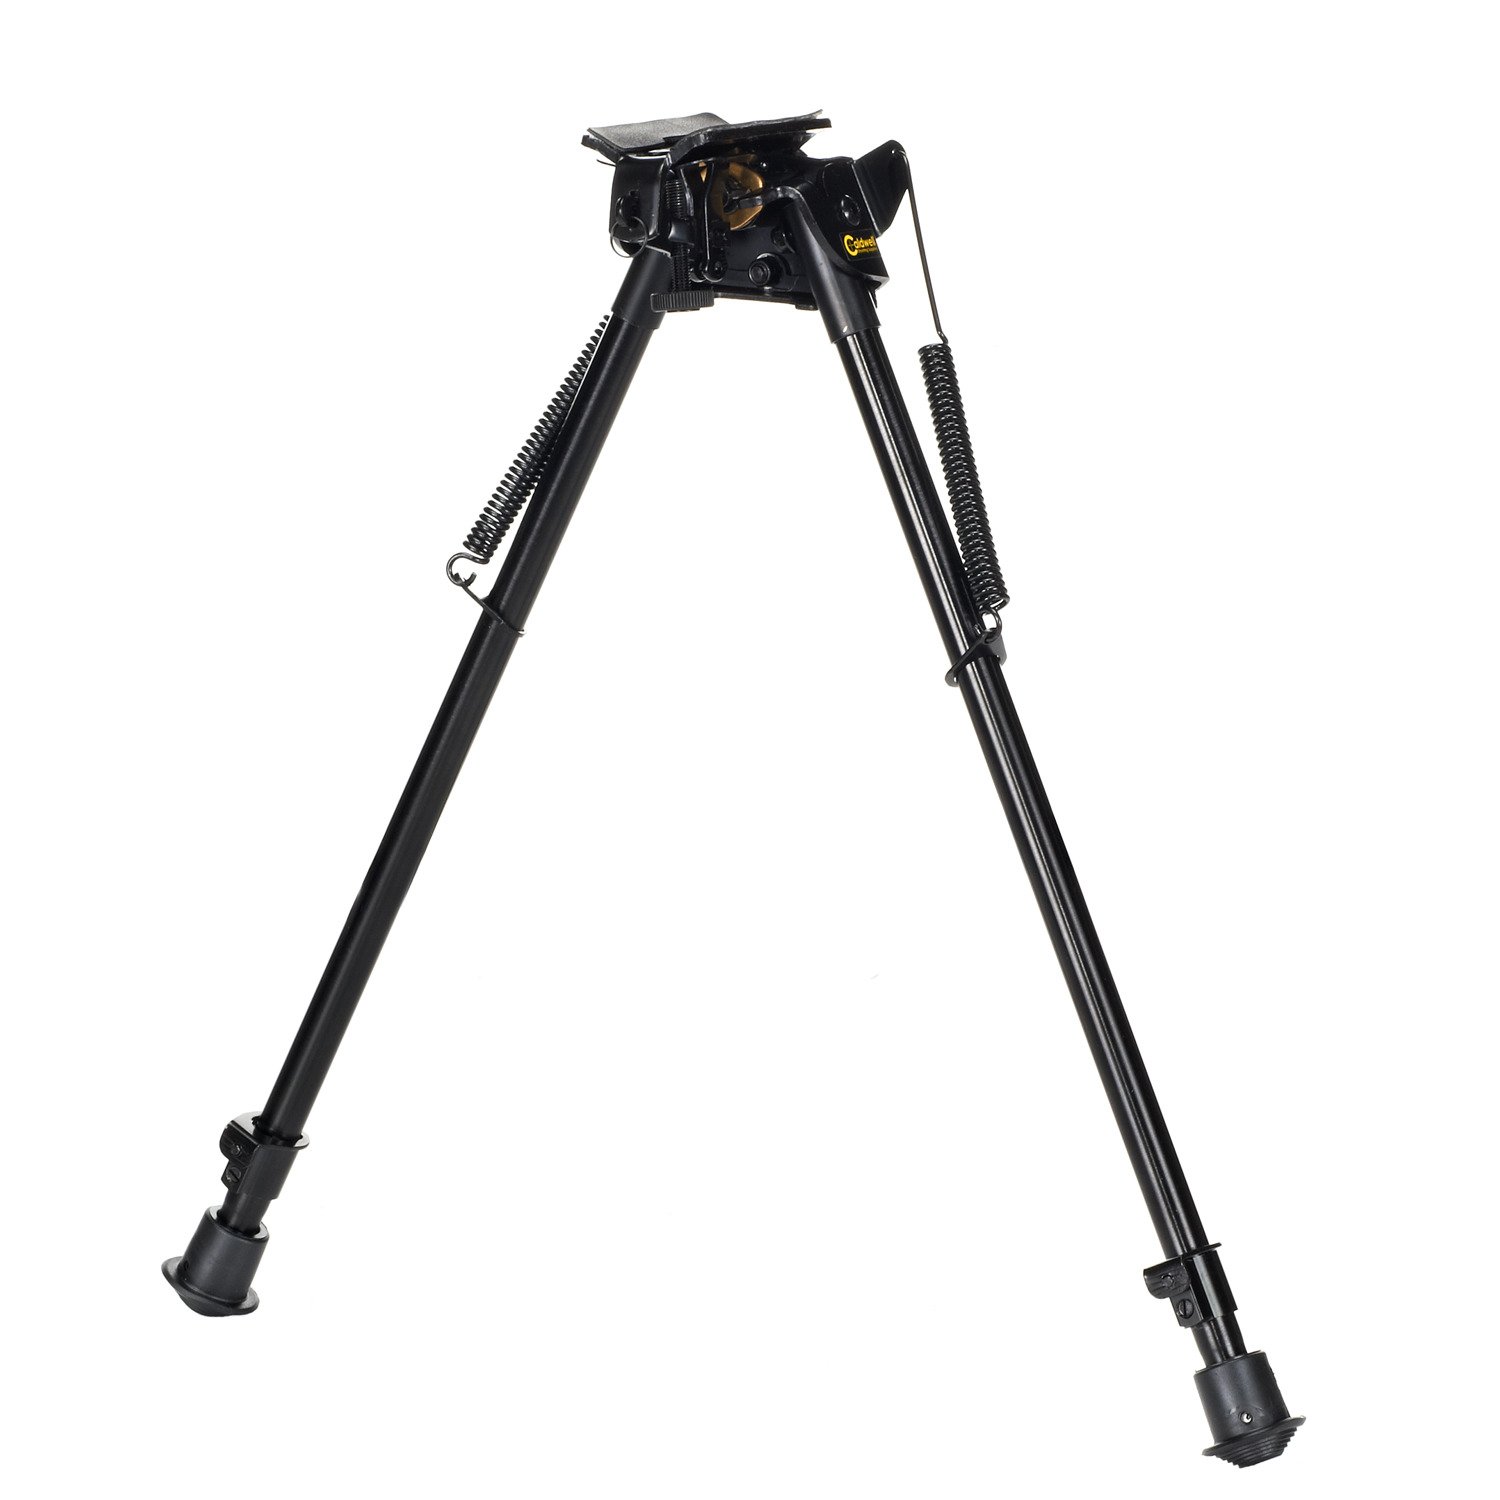  AVAWO Hunting Rifle Bipod - 6 Inch to 9 Inch Adjustable Super  Duty Tactical Rifle Bipod : Sports & Outdoors